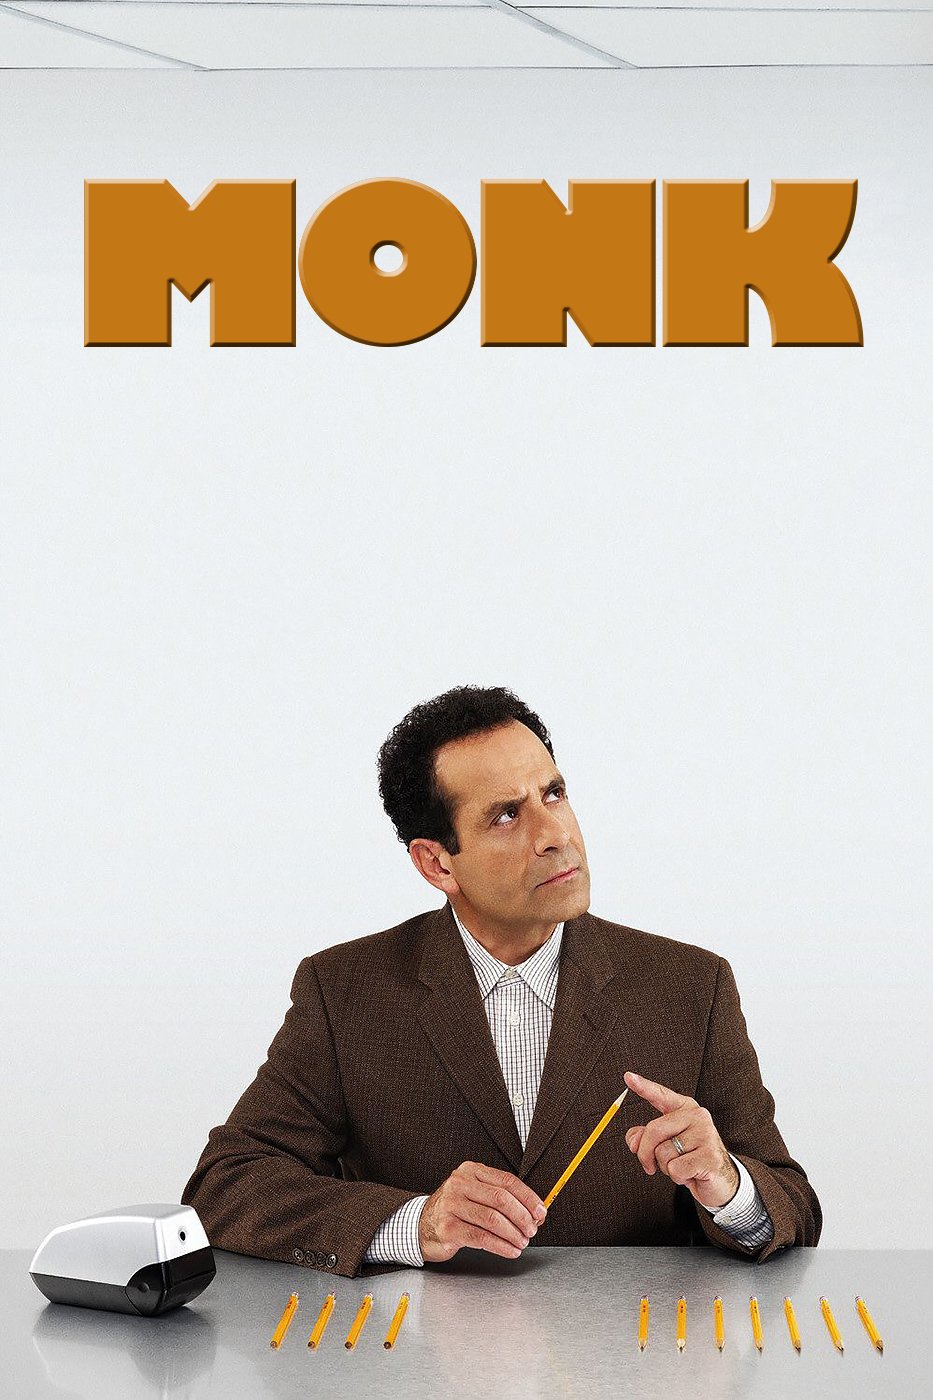 Poster for the television show Monk, starring Tony Shaloub